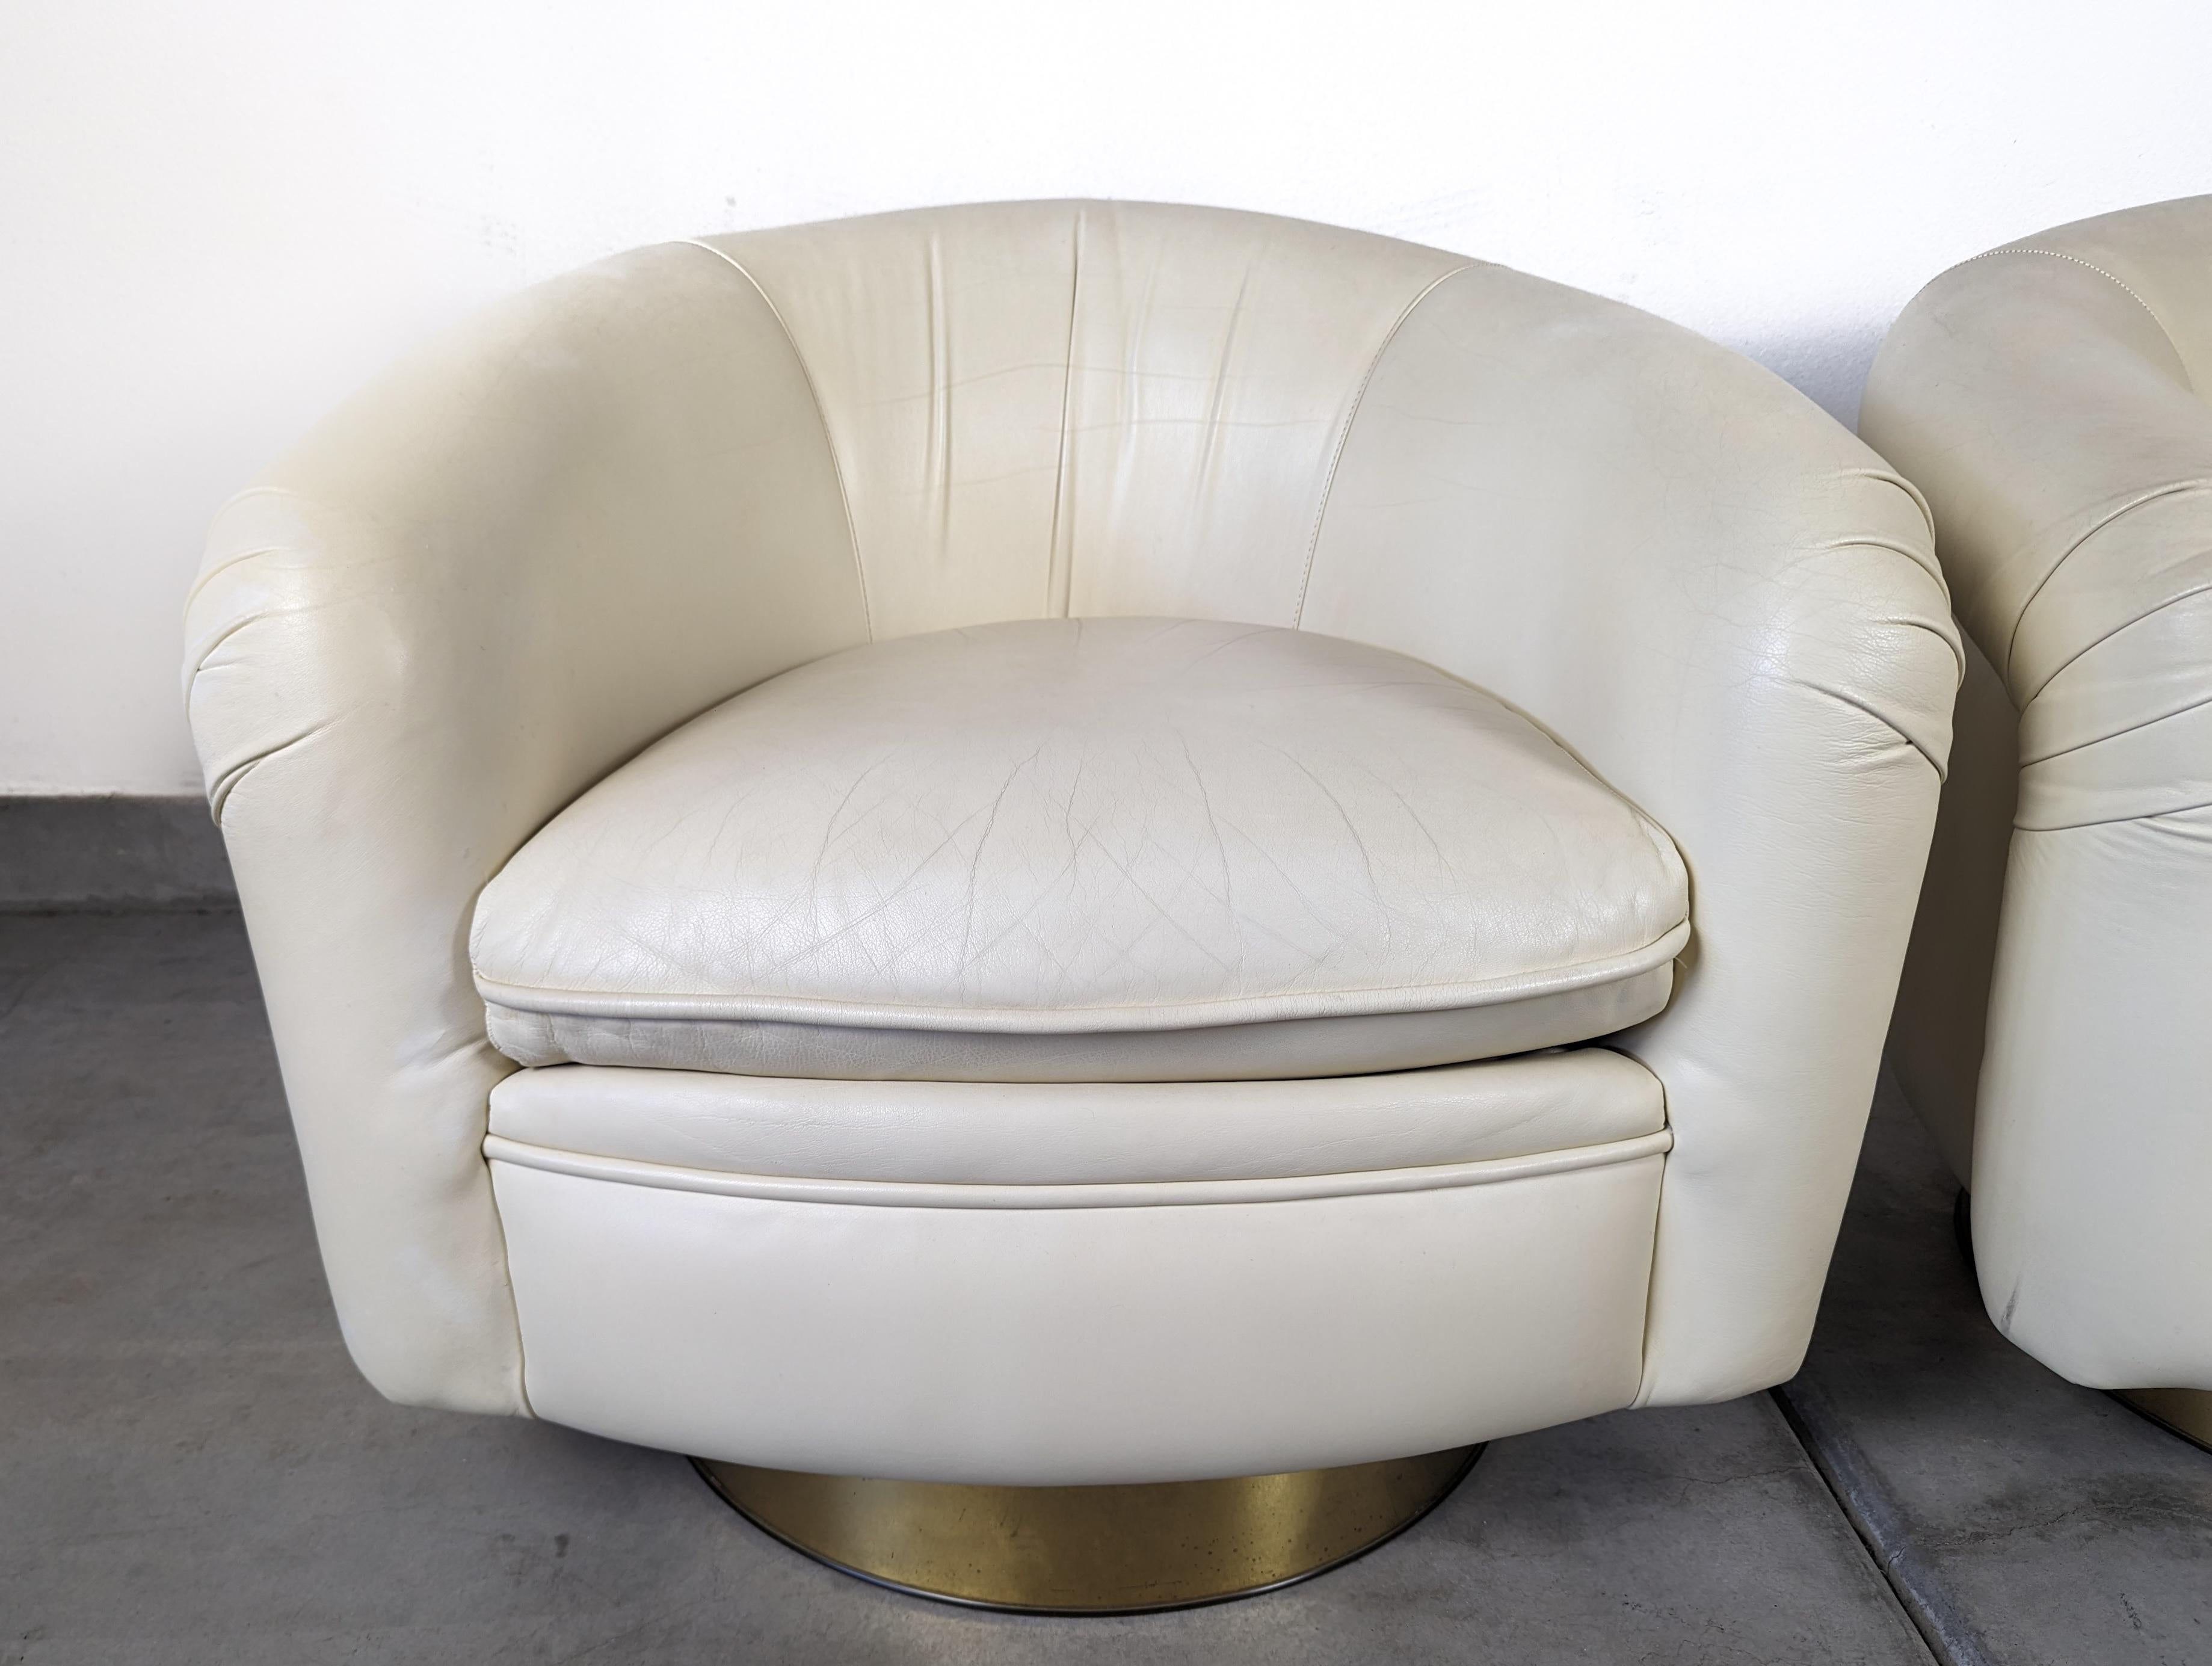 Leather Tilt Swivel Lounge Chairs by Milo Baughman for Thayer Coggin, c1970s For Sale 8